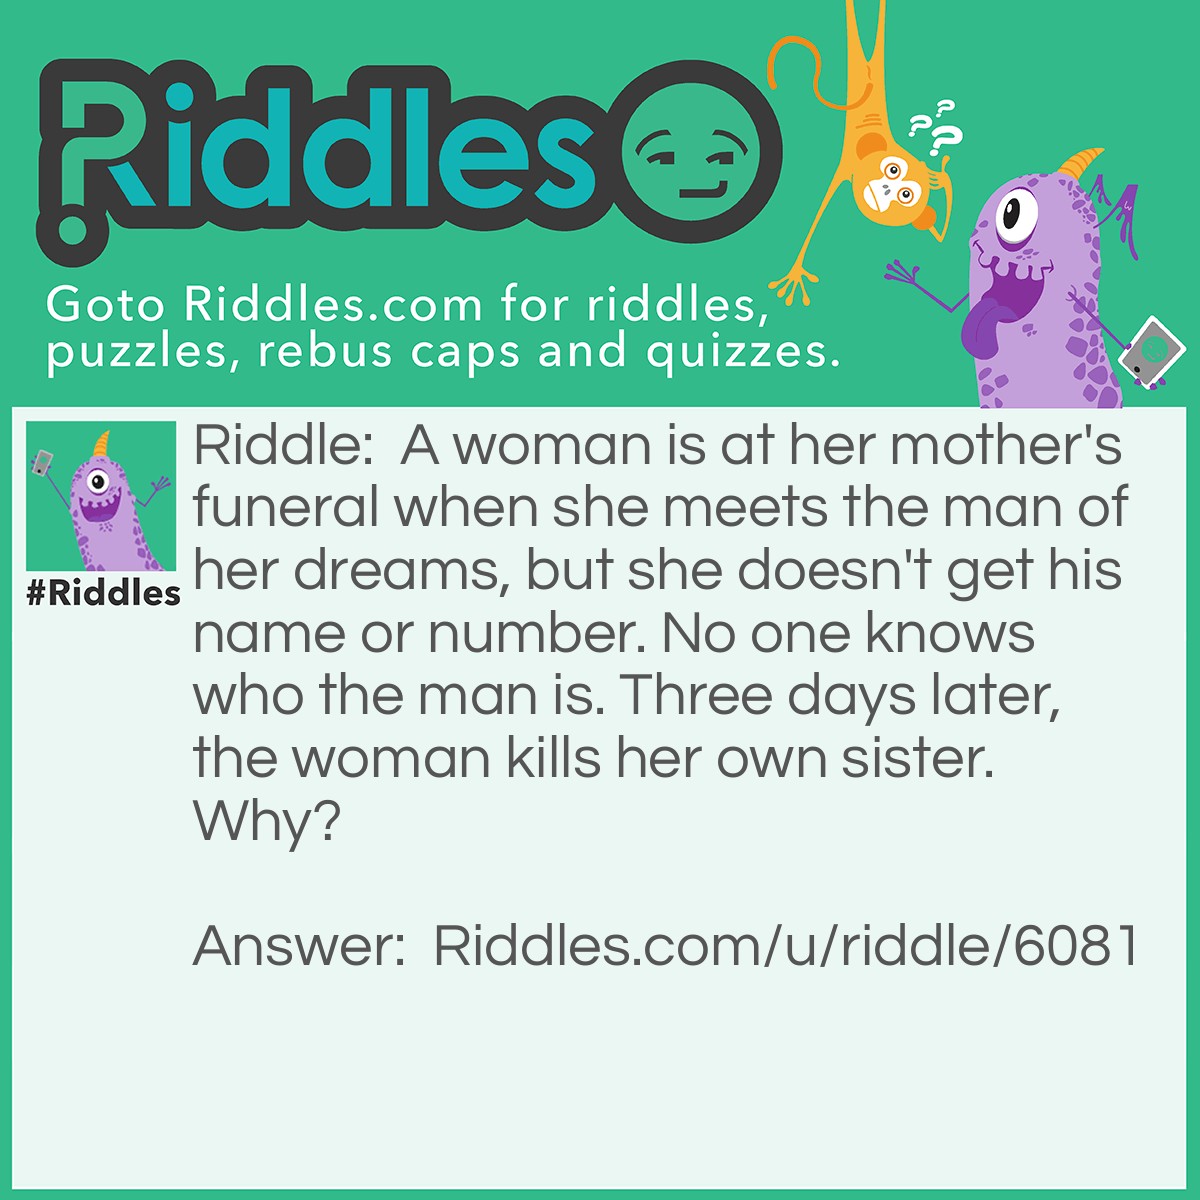 Riddle: A woman is at her mother's funeral when she meets the man of her dreams, but she doesn't get his name or number. No one knows who the man is. Three days later, the woman kills her own sister. Why? Answer: To see if the man would come to her sister's funeral. If you guessed this, you have the mind of a psychopath.